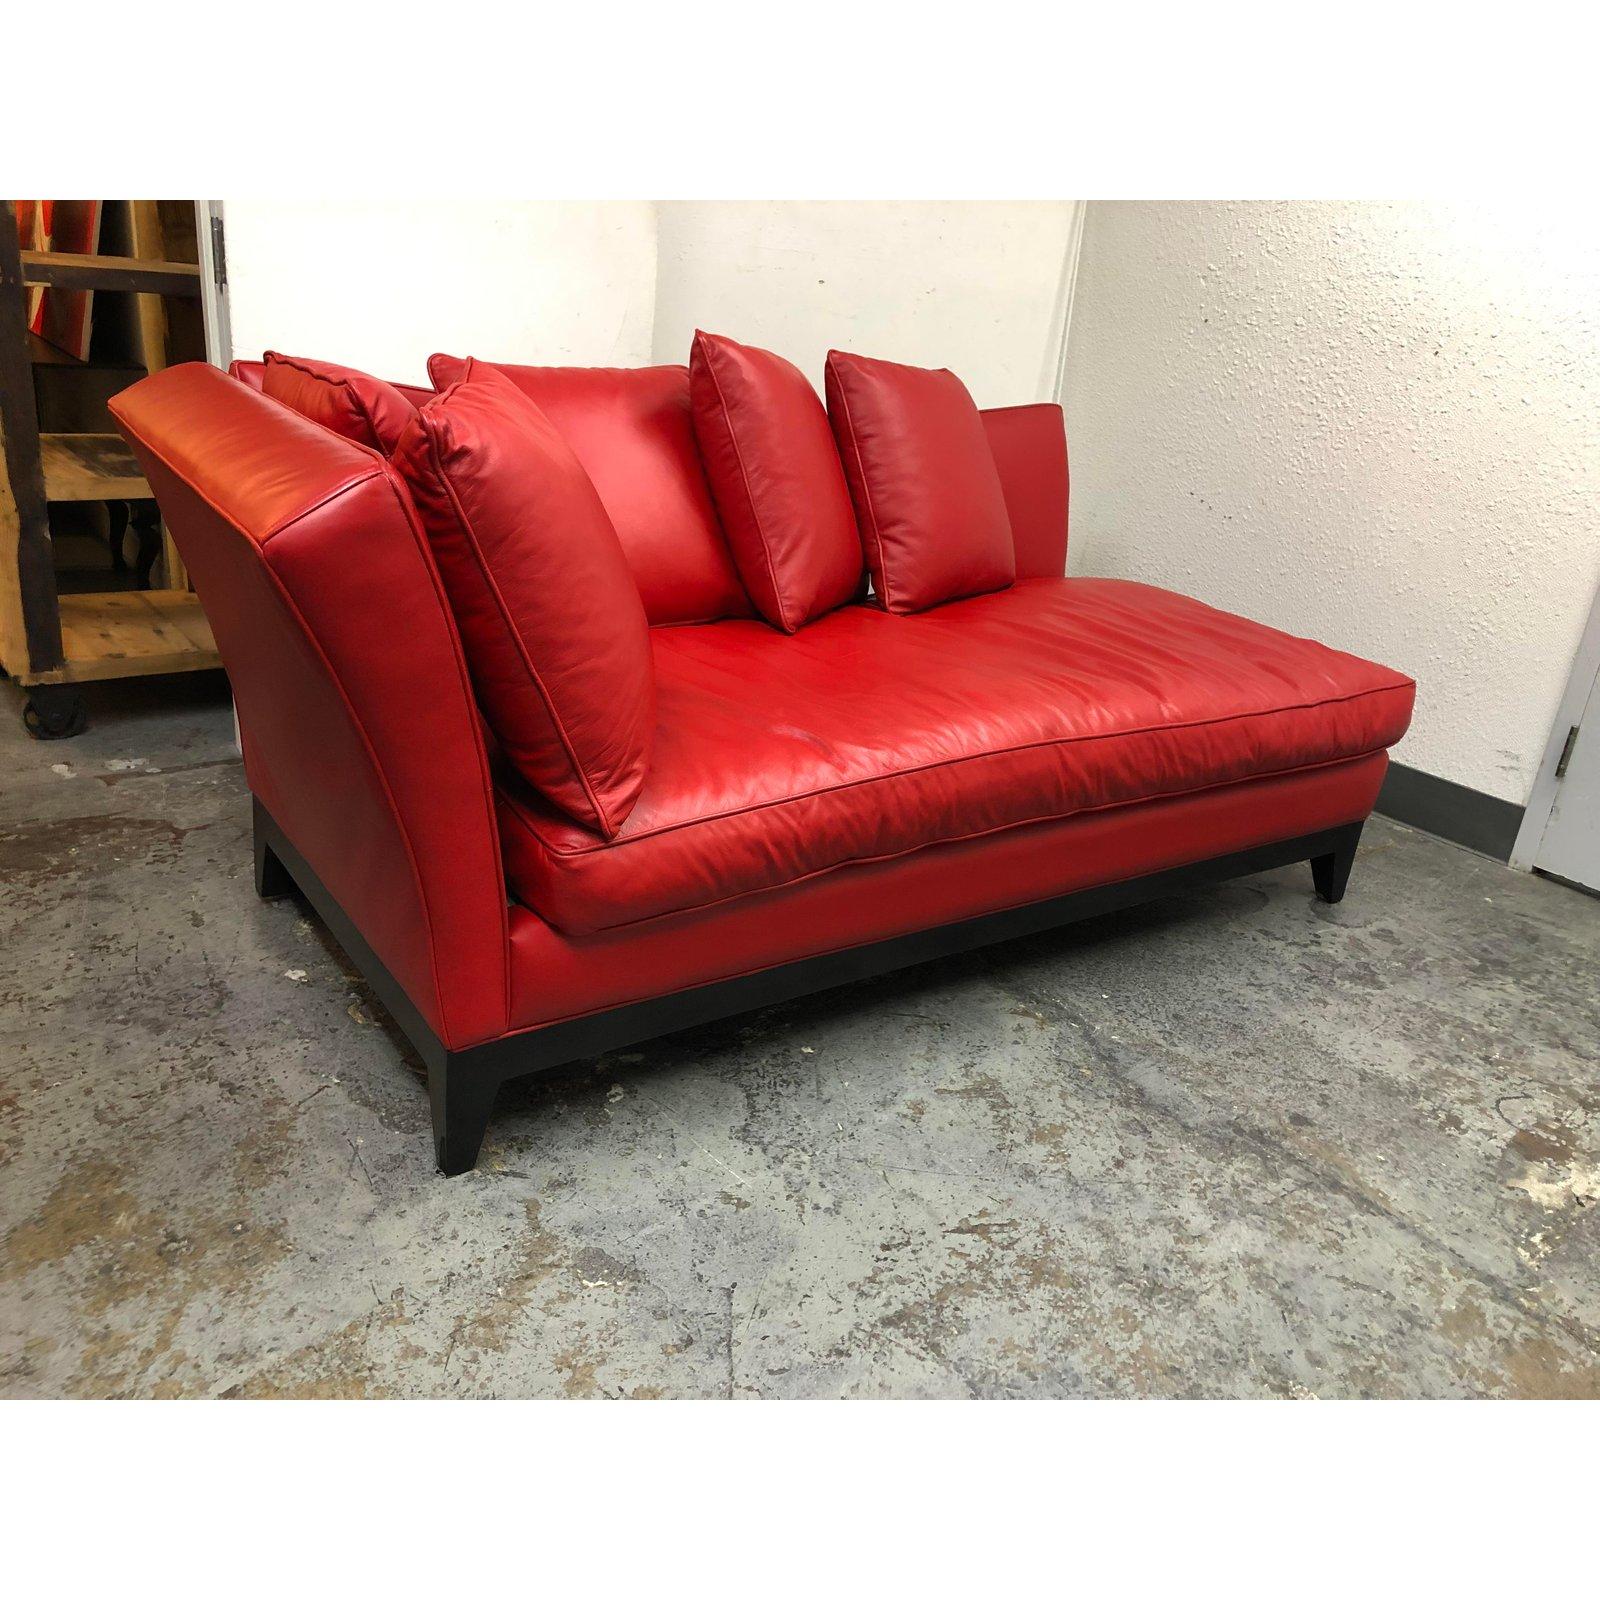 Custom Red Leather Chaise Sofa Lounge For Sale 1